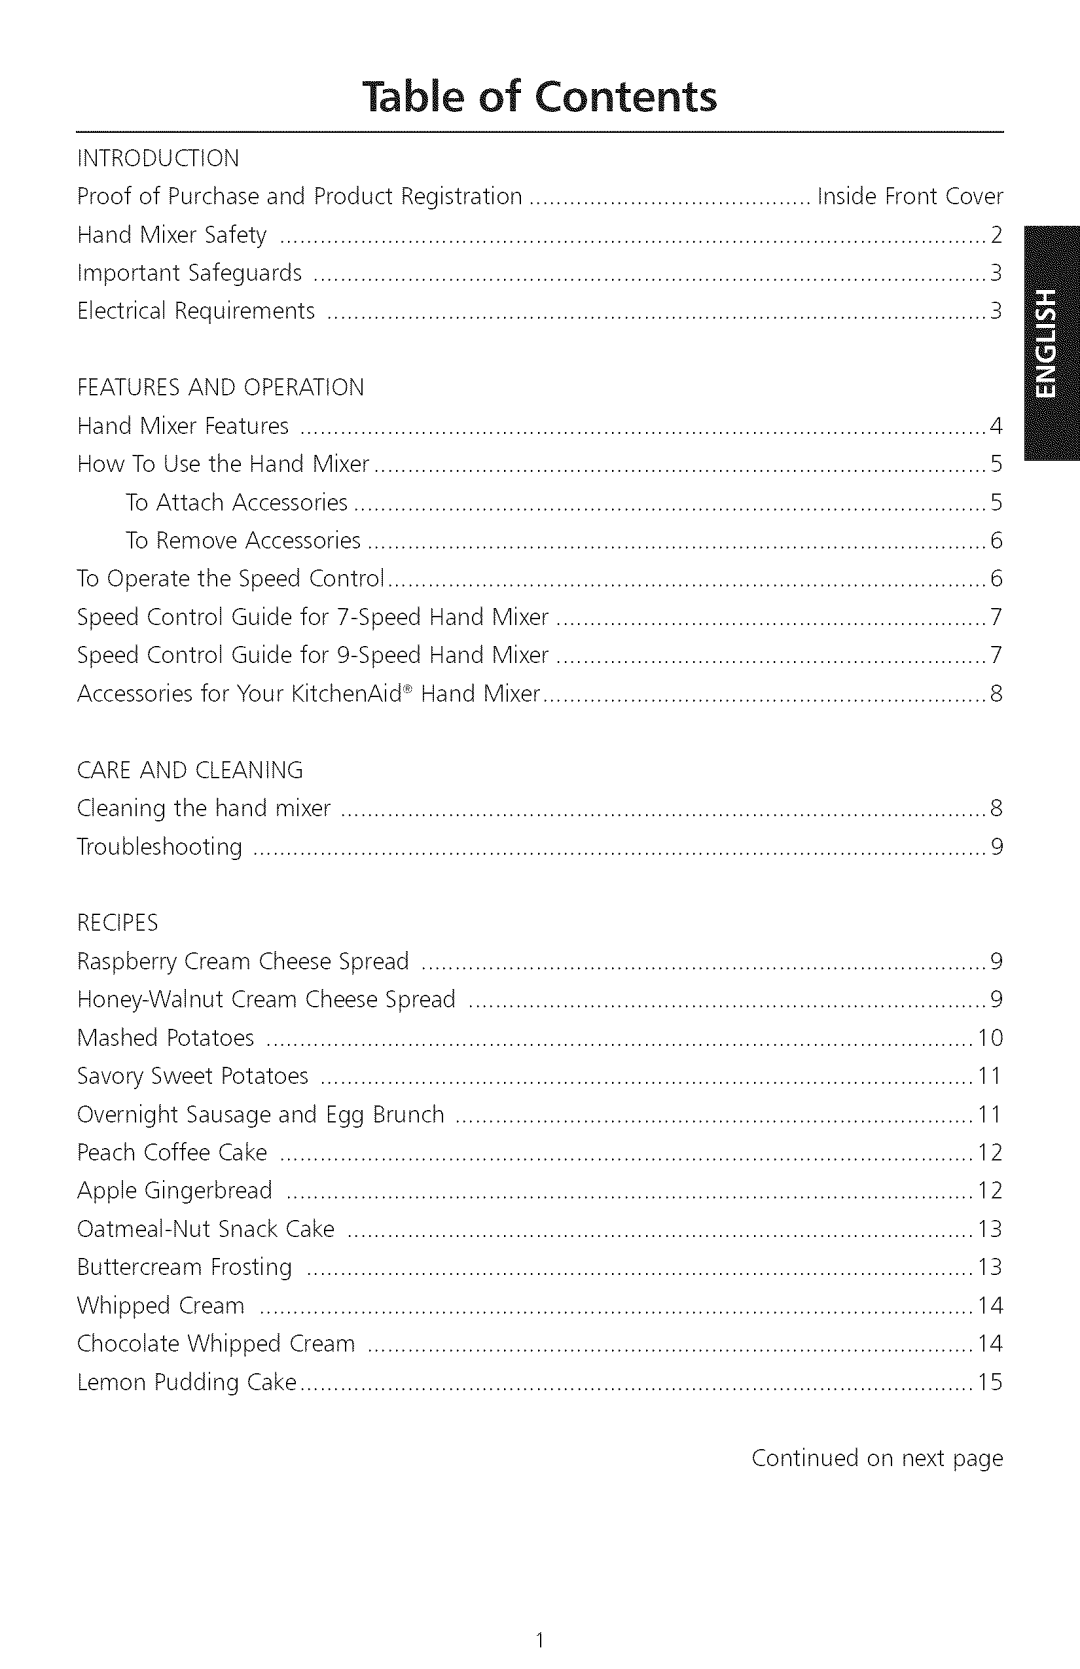 KitchenAid KHM720, KHM920 manual Table of Contents, To Attach 